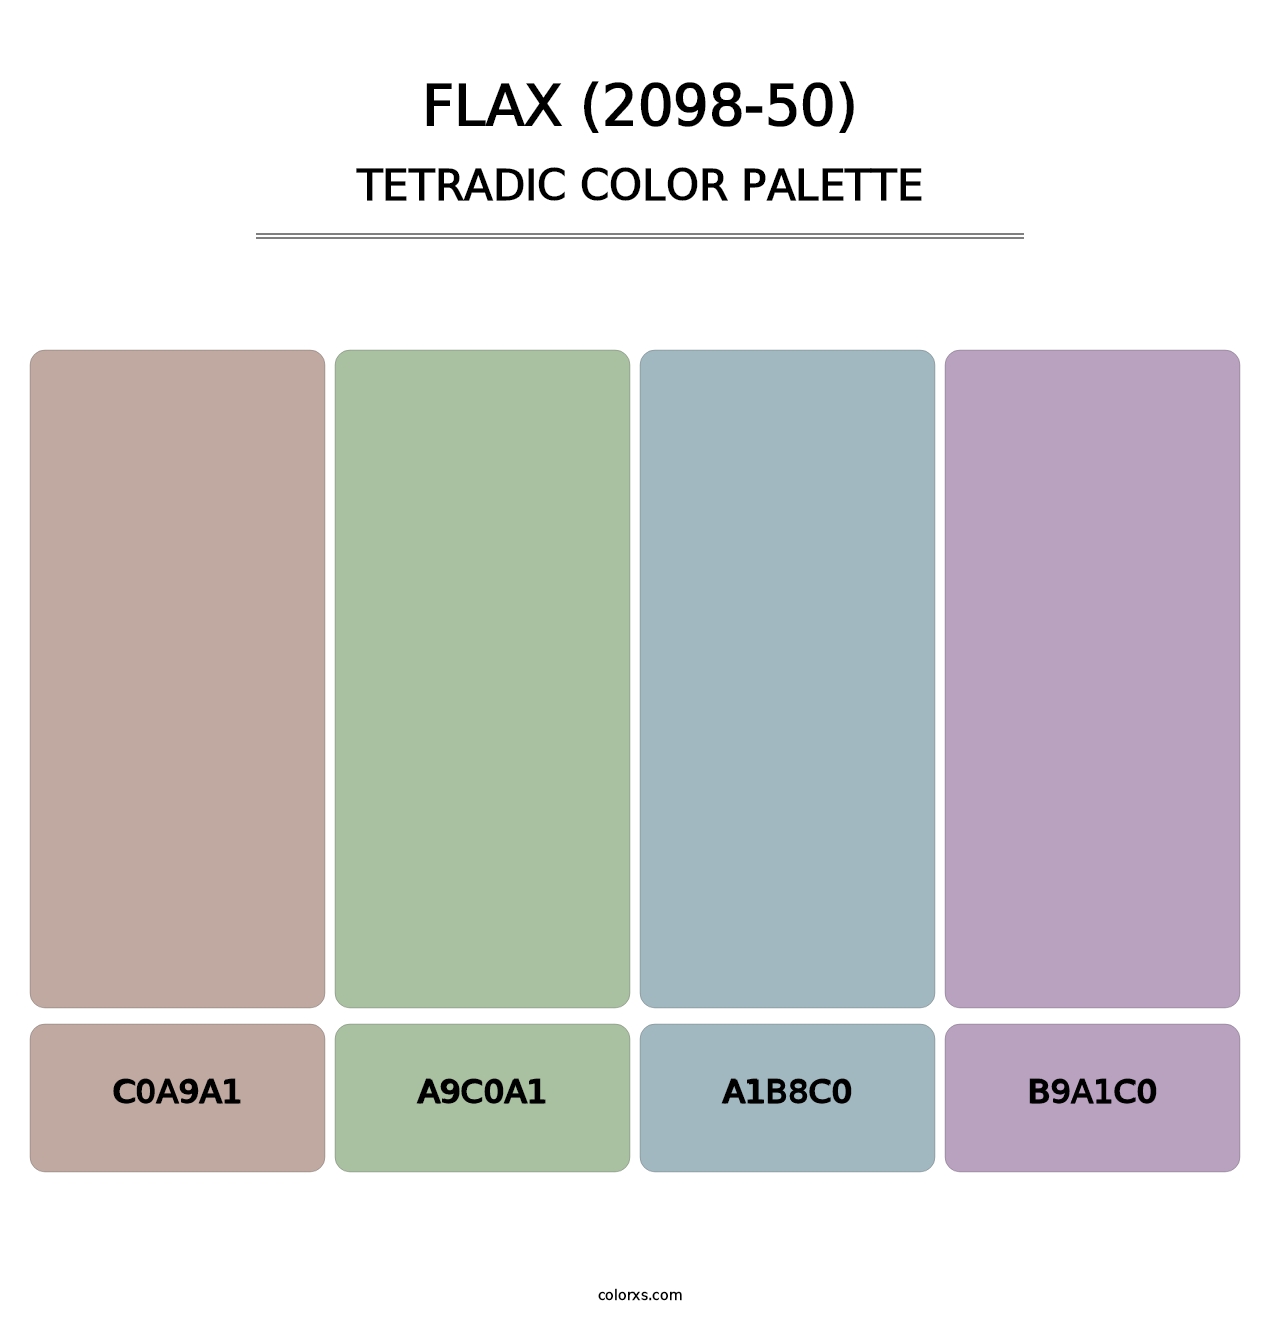 Flax (2098-50) - Tetradic Color Palette